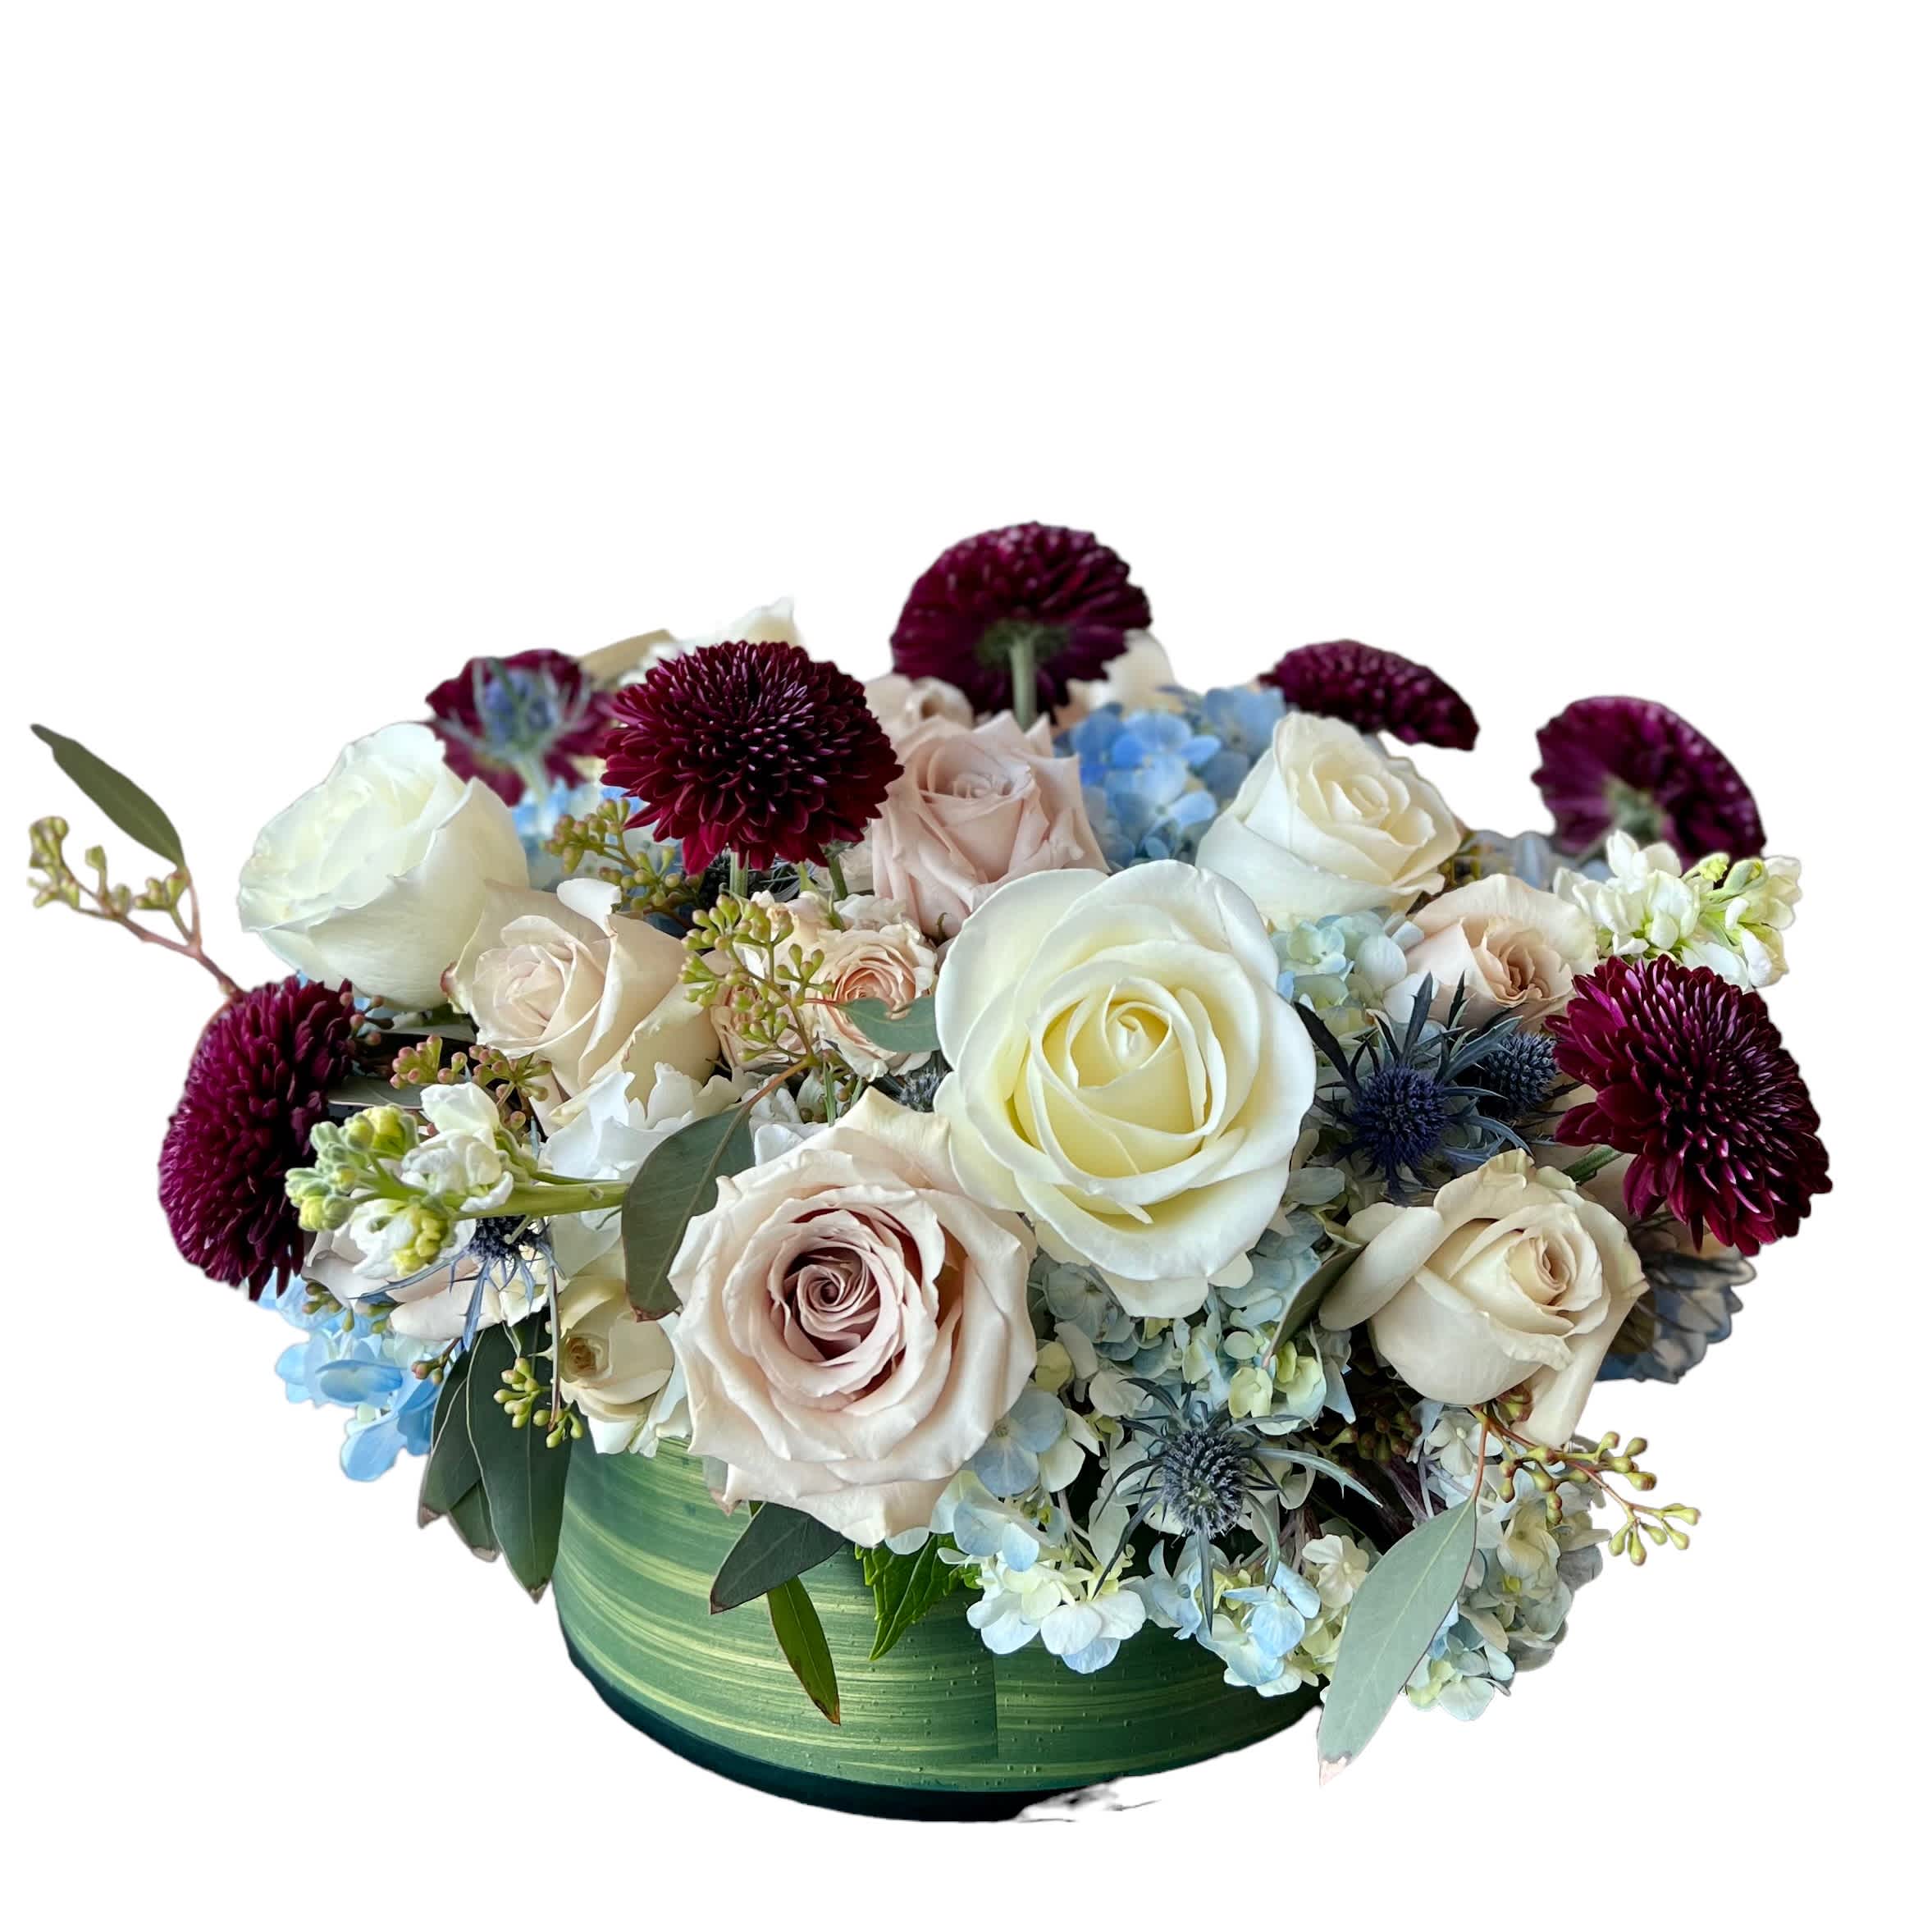 Modern Mix of Blooms - Flowers pretty enough for your wedding day!